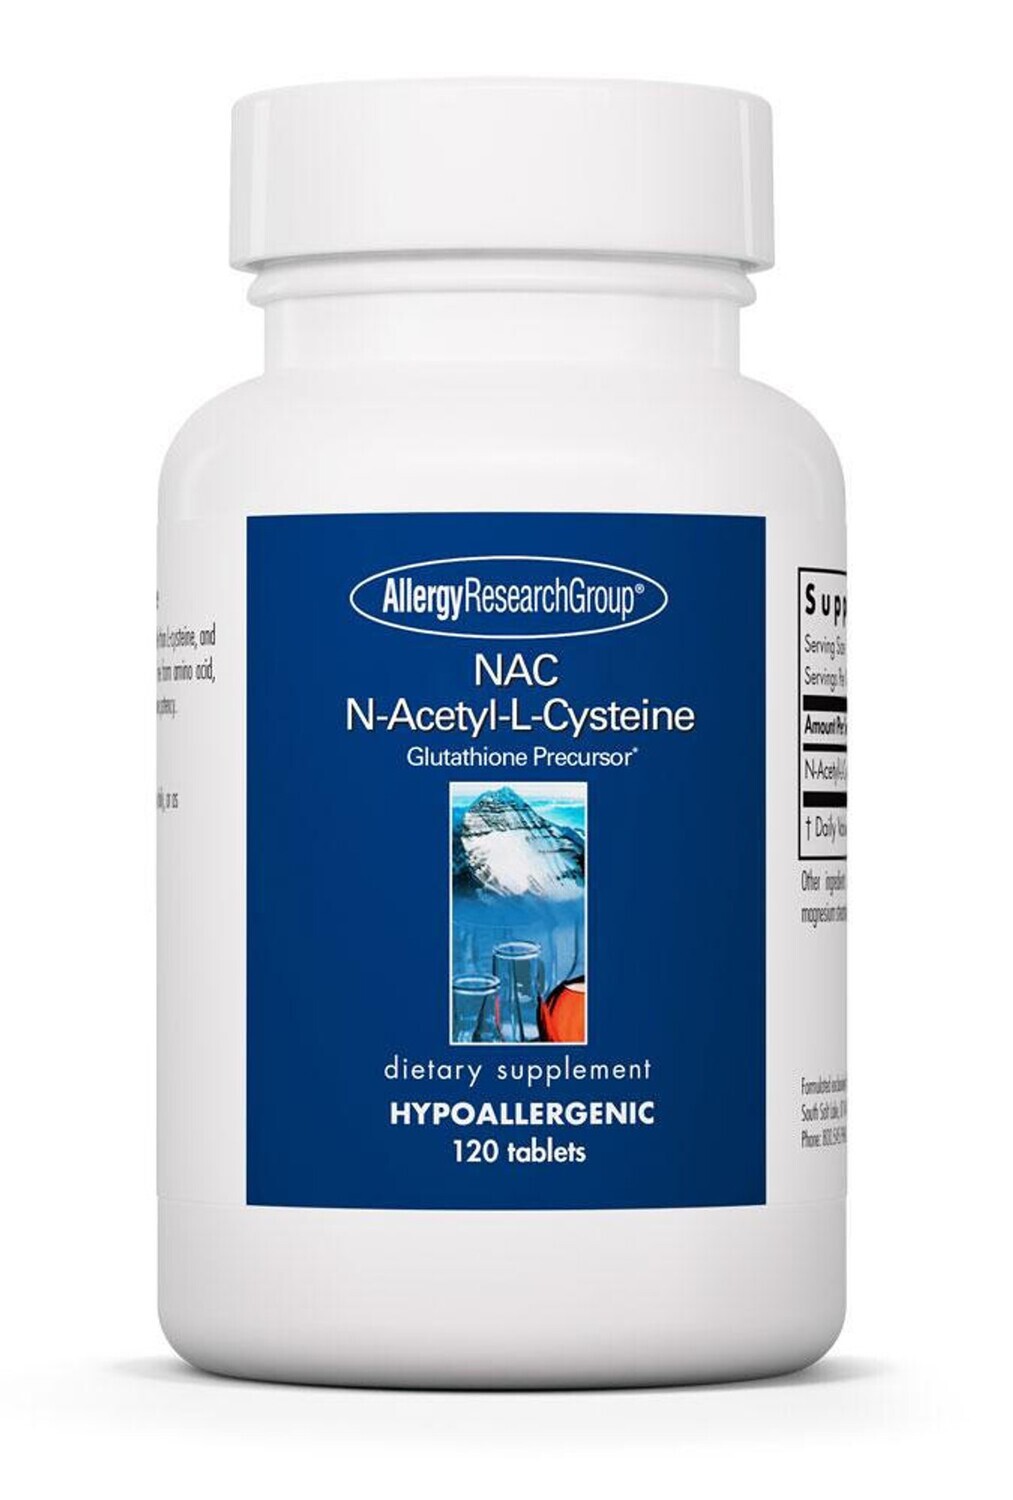 NAC N-Acetyl-L-Cysteine 500 mg 120 tabs Allergy Research Group